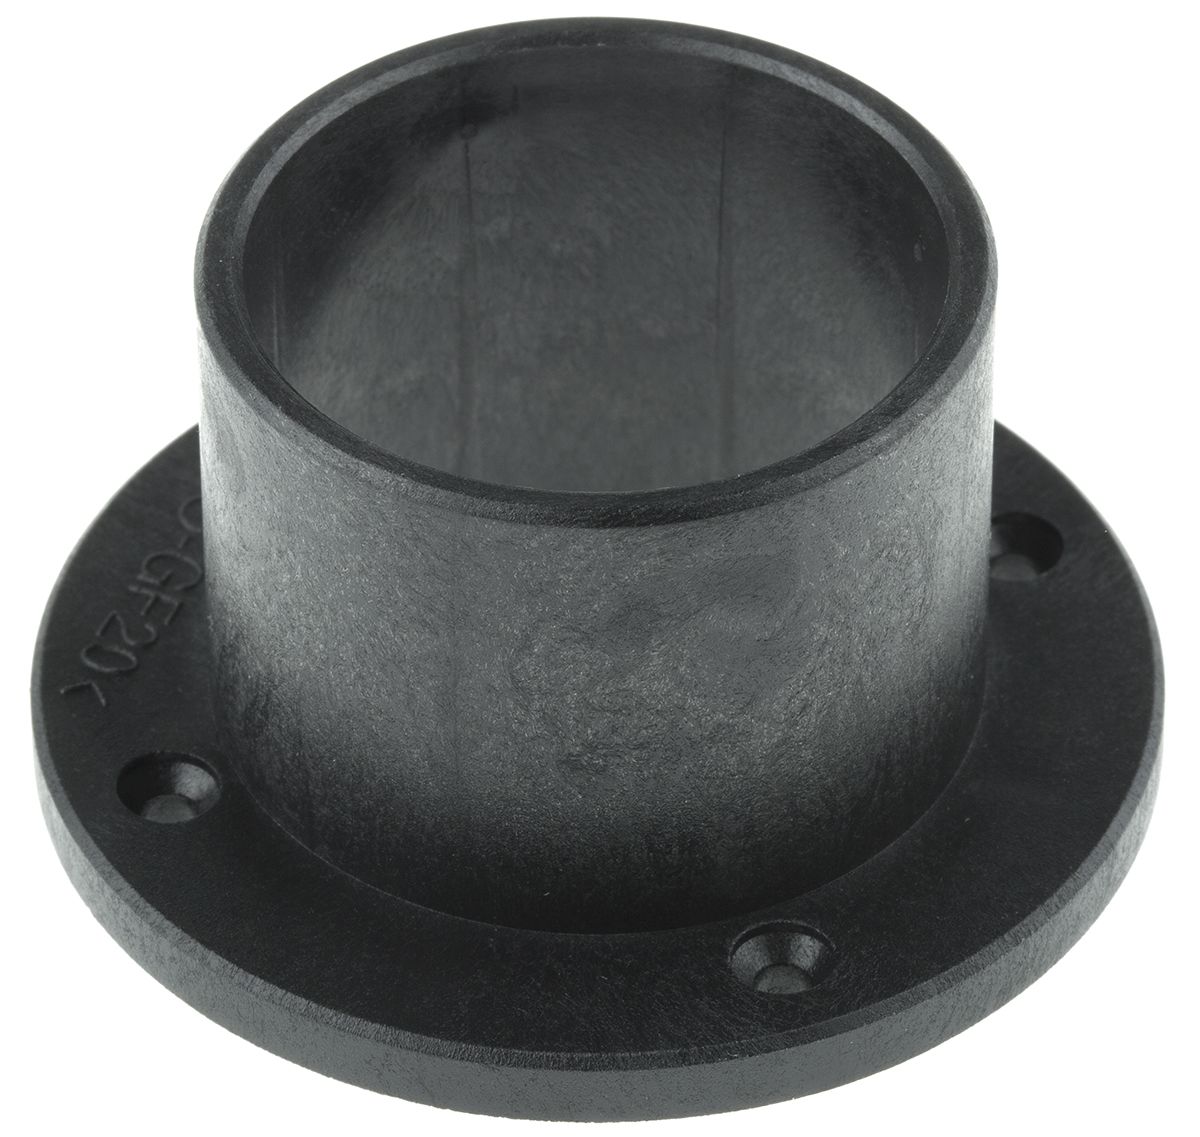 Fan Inlet Ring for use with U97EM series fans